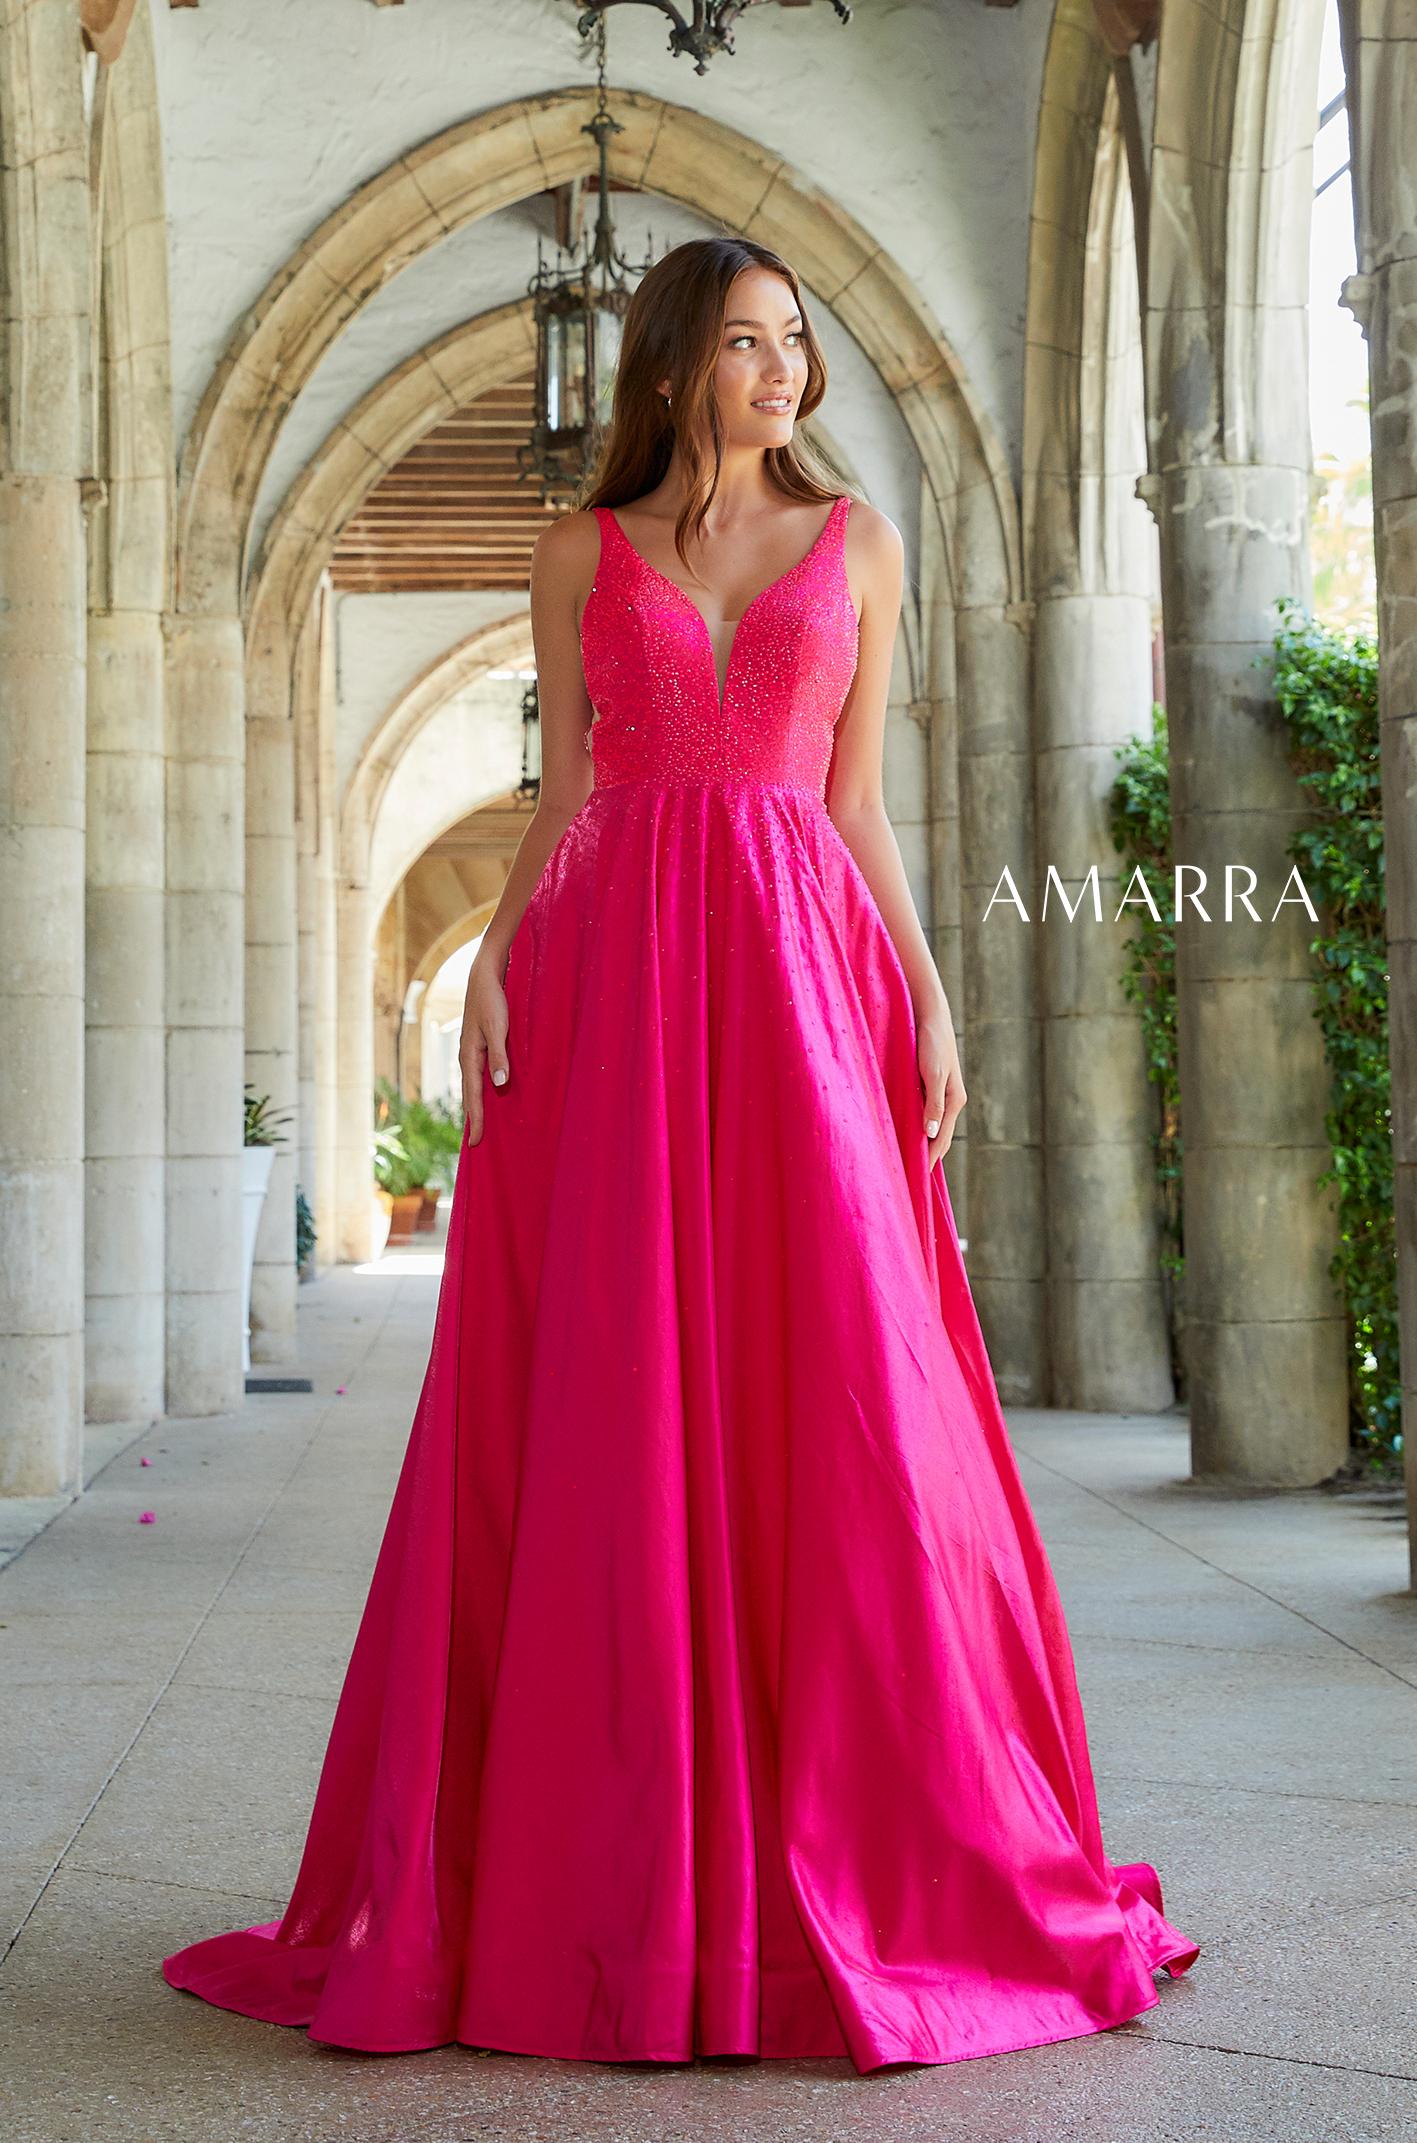 Amarra 87309 Long A Line V Neck Prom Dress Pockets Backless Formal Ball Gown Rhinestone ball gown featuring a V-neckline, side panels, open back, and sweep train. Satin  Available Sizes: 00-16  Available Colors: Bright Fuchsia, Purple, Turquoise